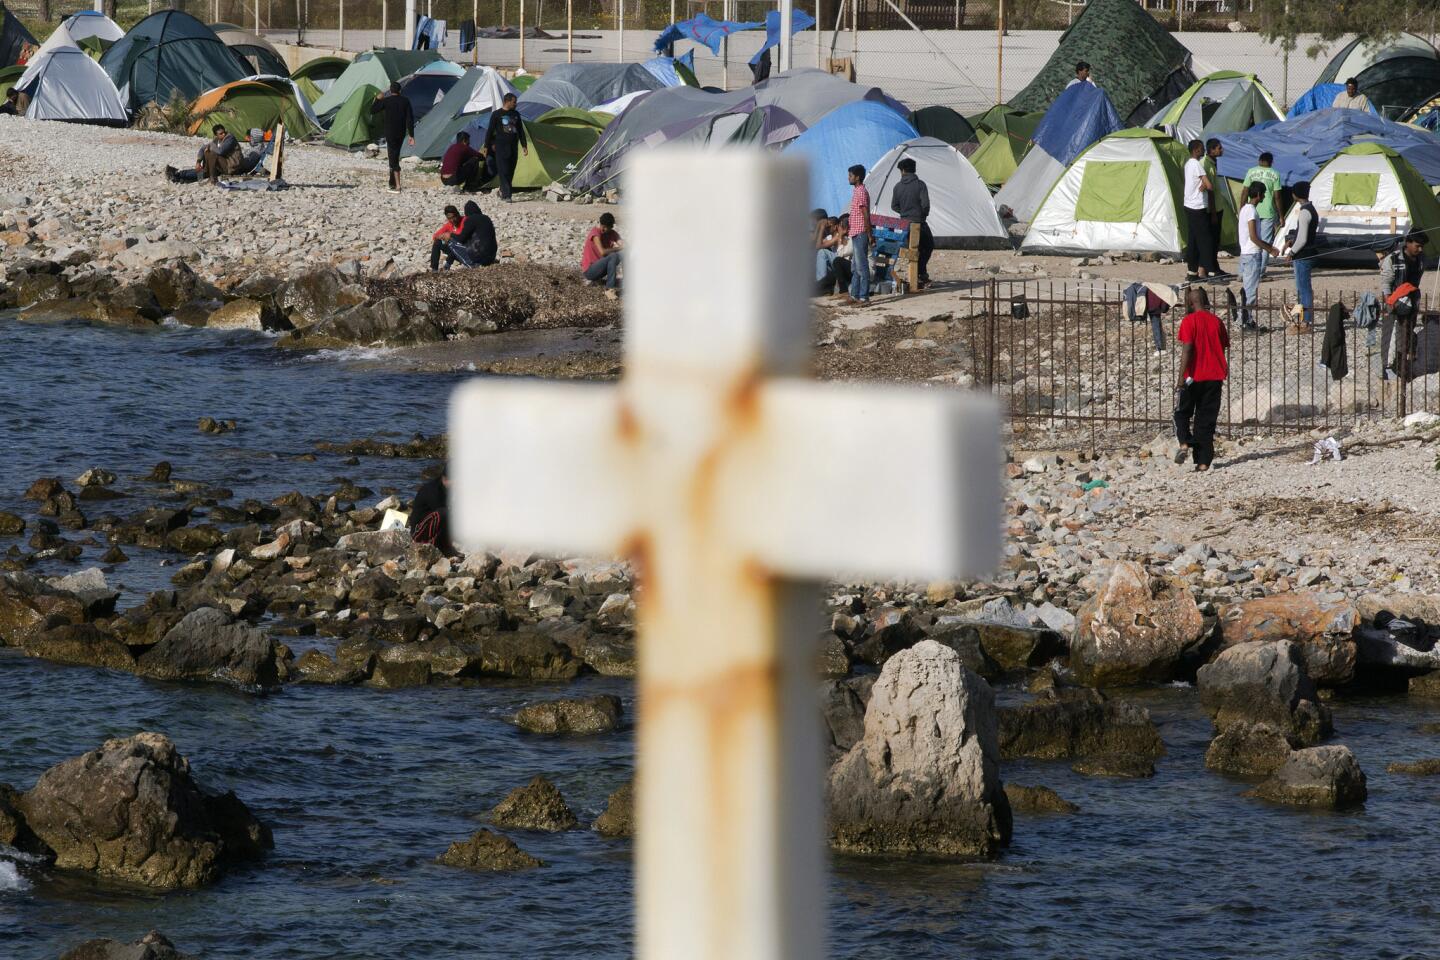 Pope Francis to visit Lesbos, Greece, amid refugee crisis